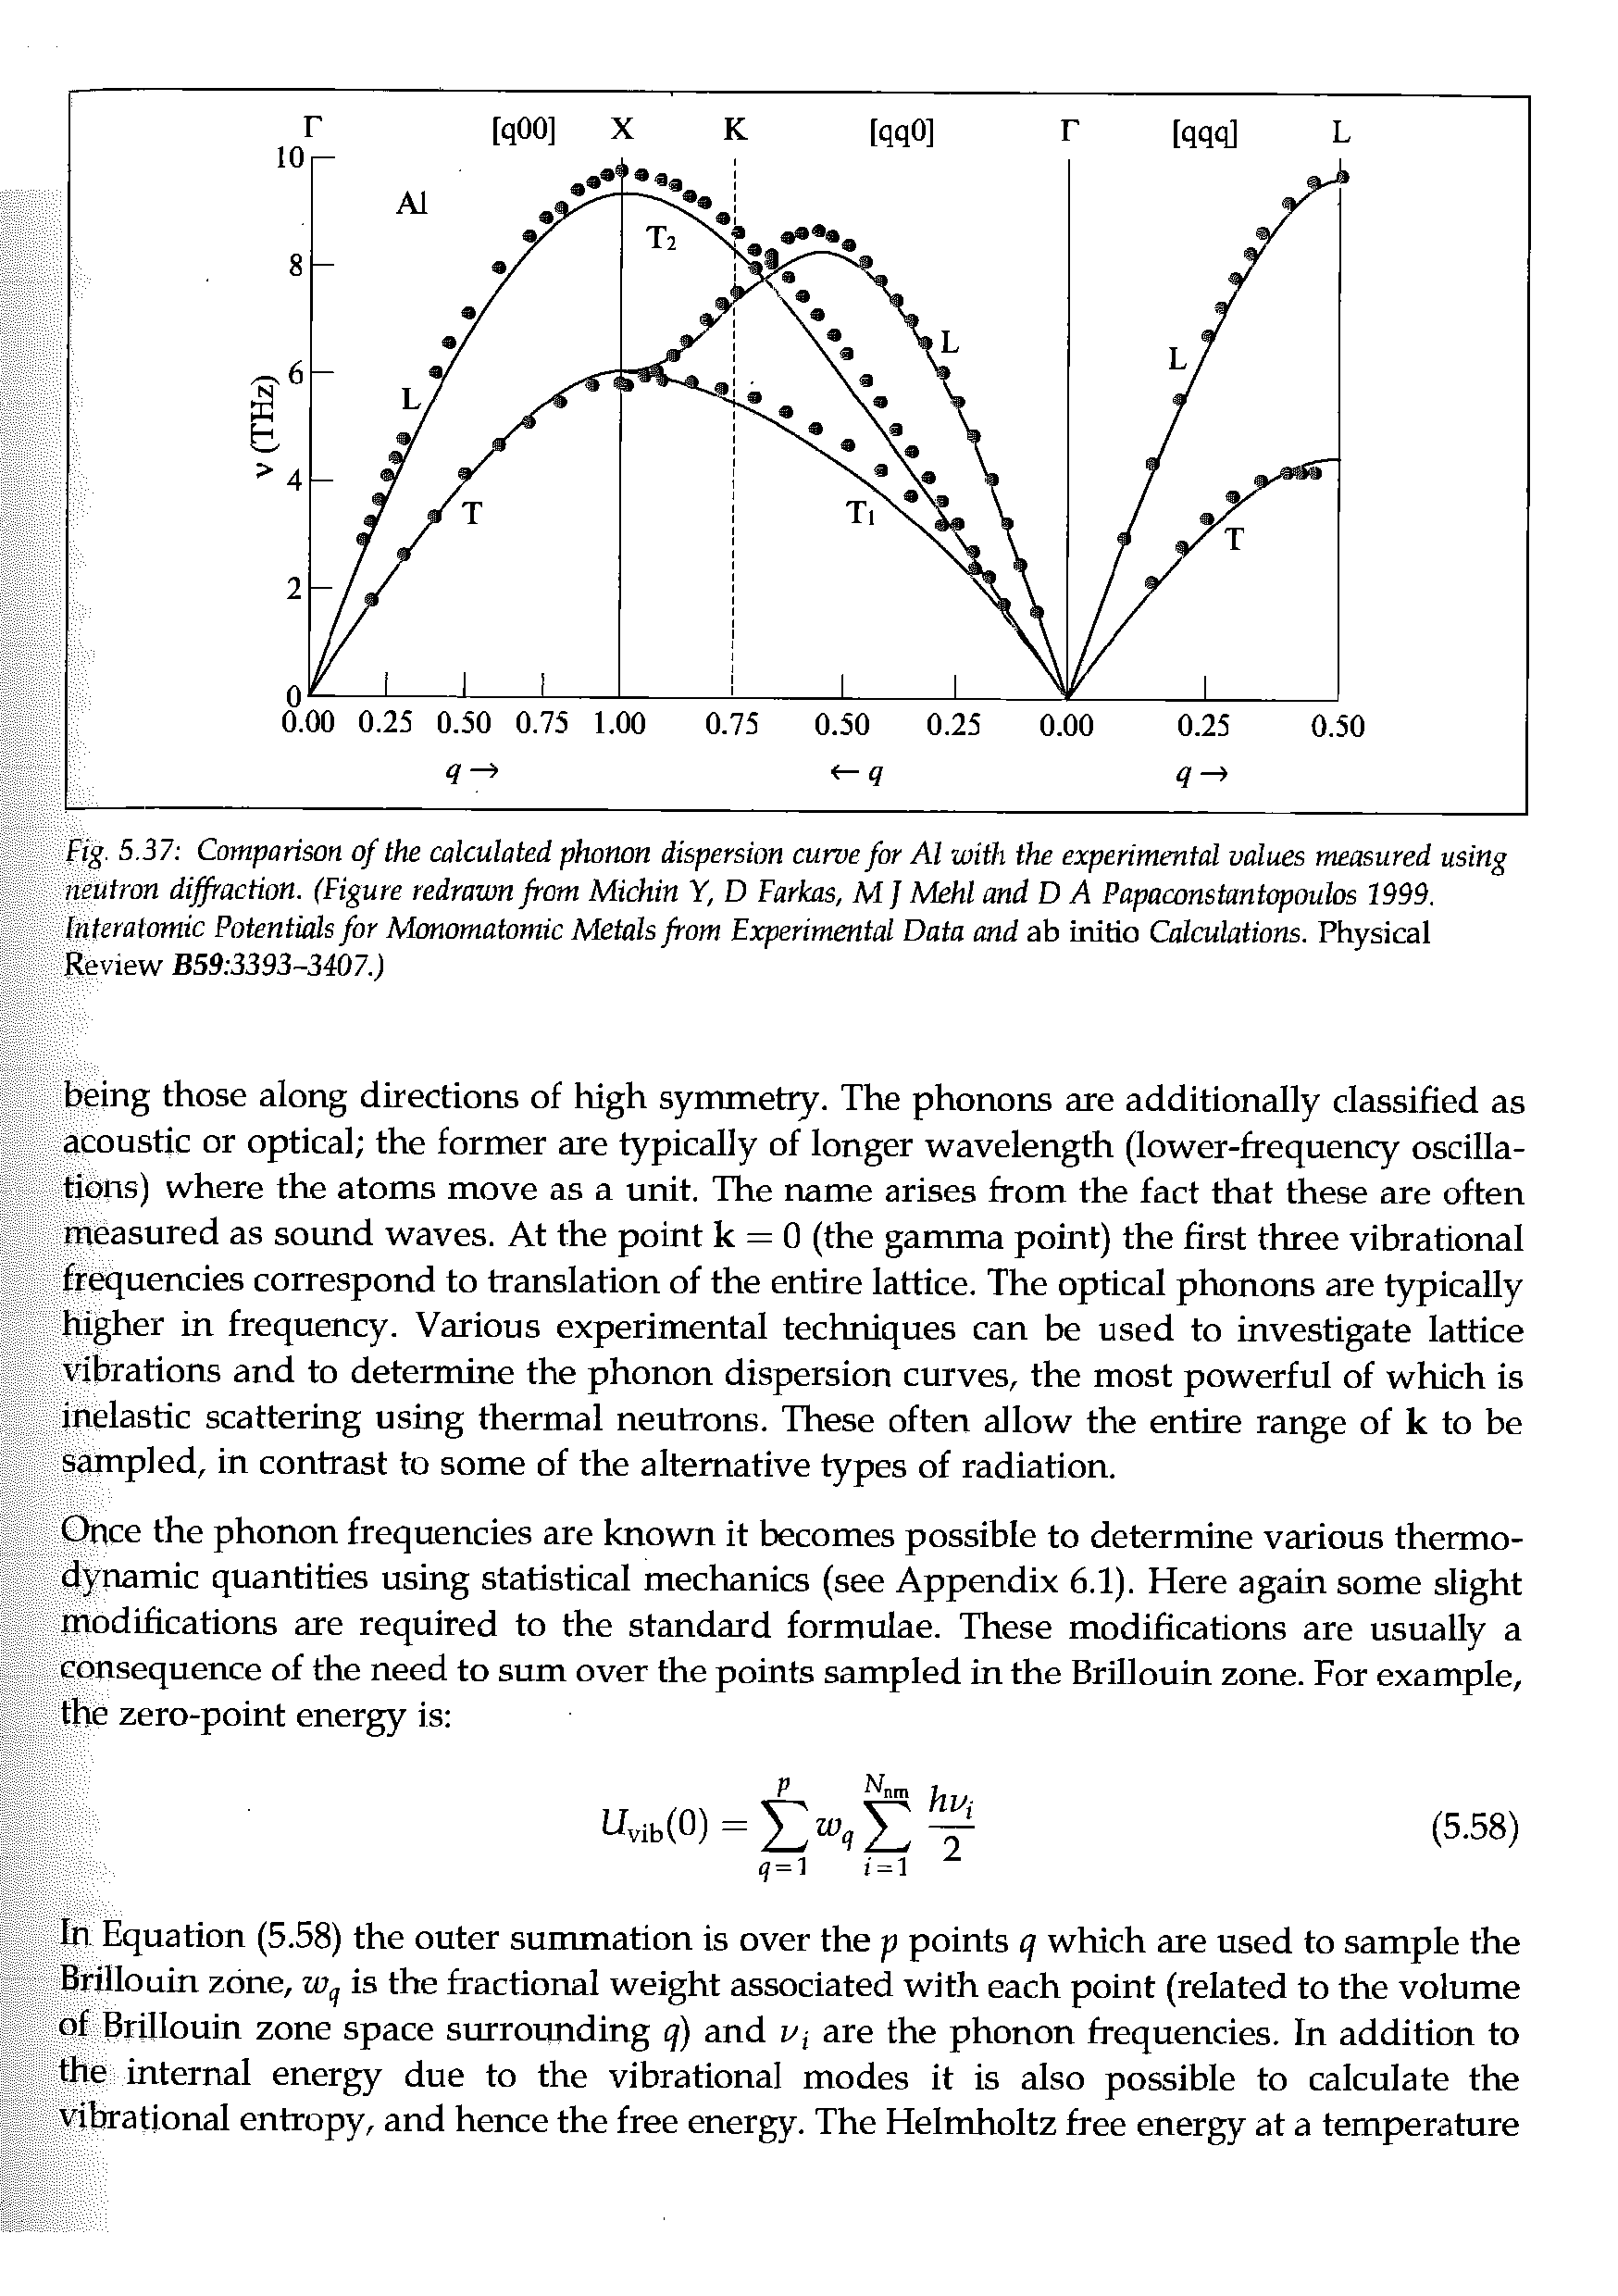 Fig. 5.37 Comparison of the calculated phonon dispersion curve for Al with the experimental values measured using neutron diffraction. (Figure redrawn from Michin Y, D Farkas, M ] Mehl and D A Papaconstantopoulos 1999. Interatomic Potentials for Monomatomic Metals from Experimental Data and ab initio Calculations. Physical Review 359 3393-3407.)...